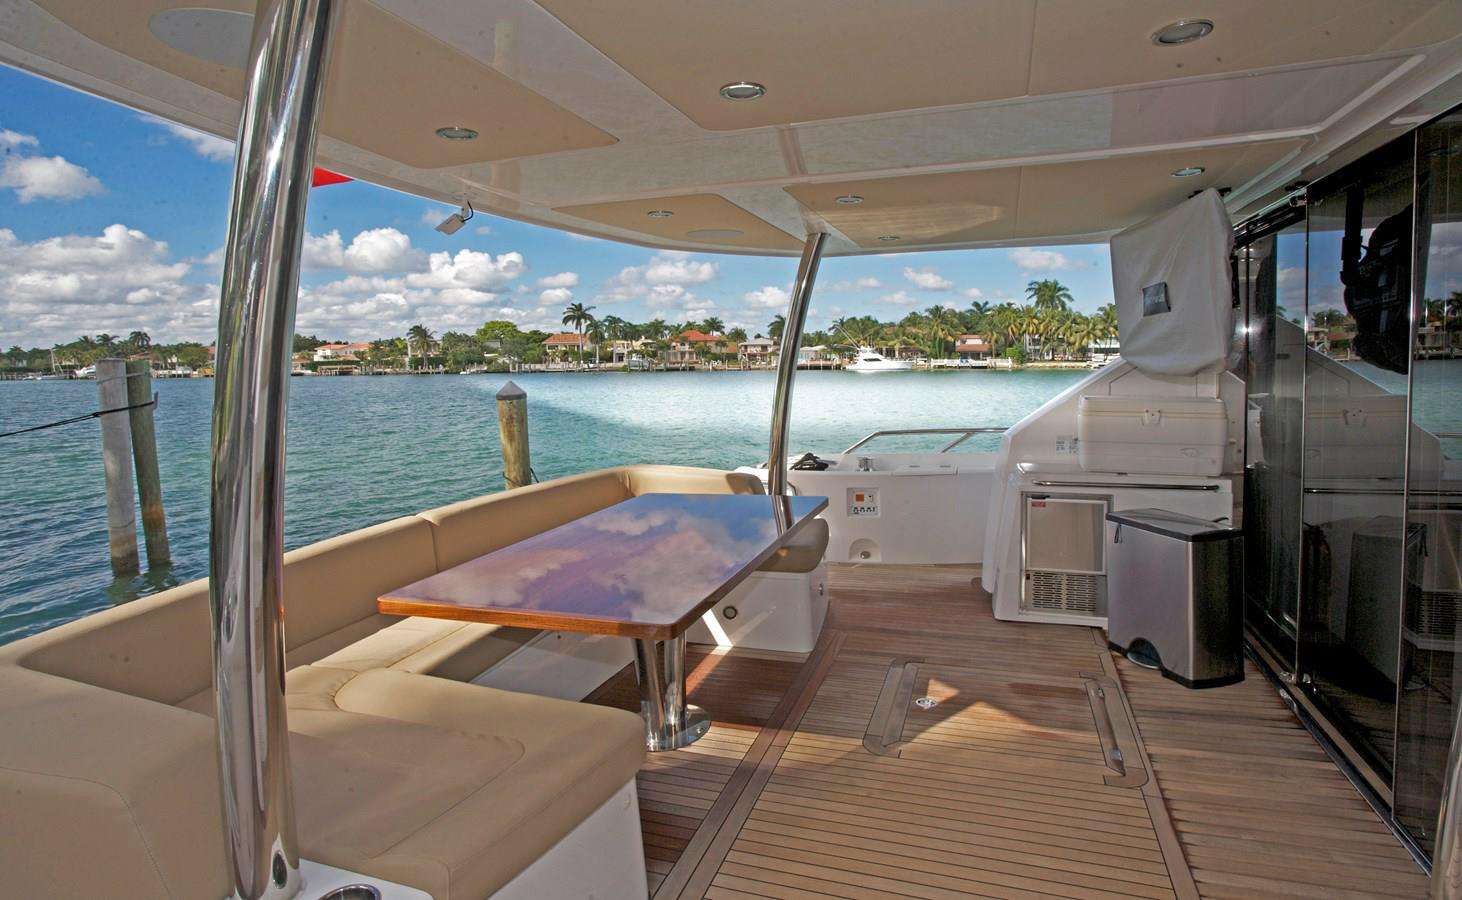 BORN TO RUN - Yacht Charter Fort Lauderdale & Boat hire in US East Coast & Bahamas 4